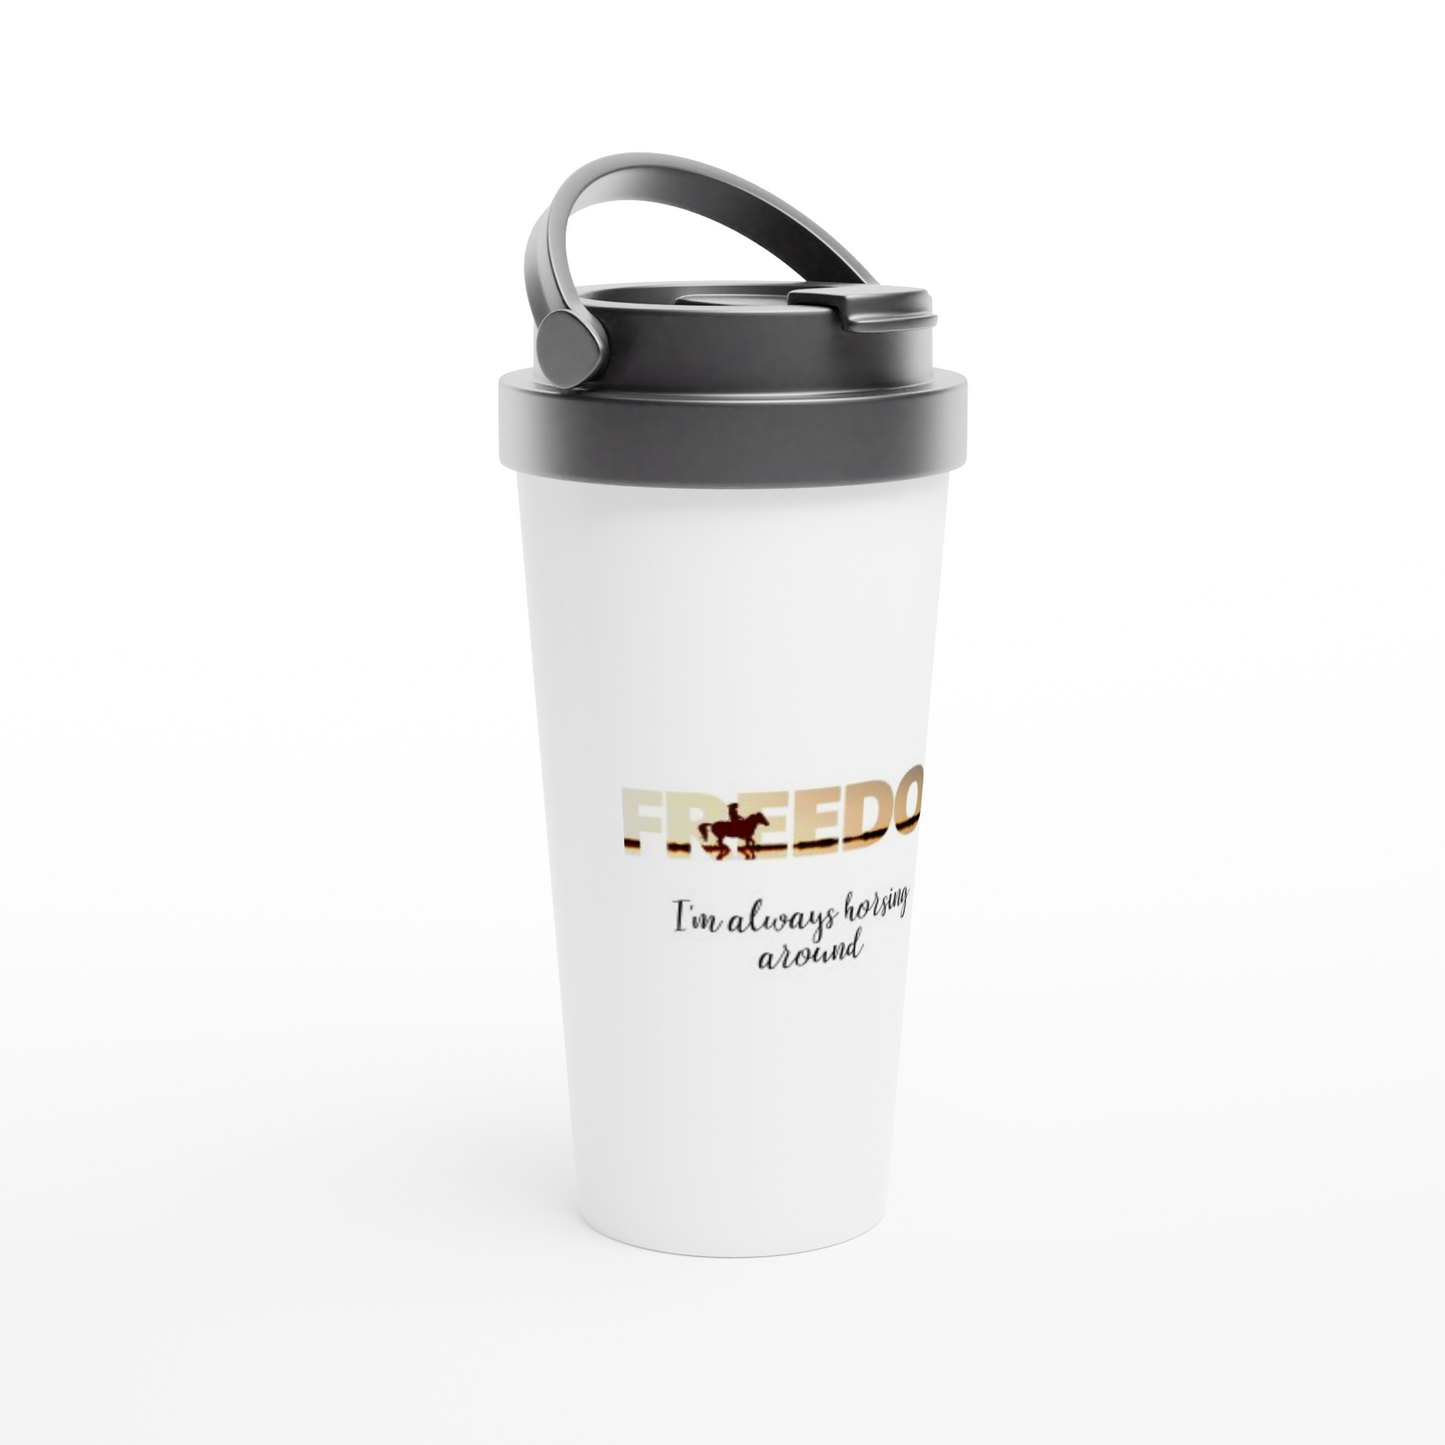 Hand Drawn Horse || 15oz Stainless Steel Travel Mug - Design: "Freedom"; Static Design; Personalizable Text